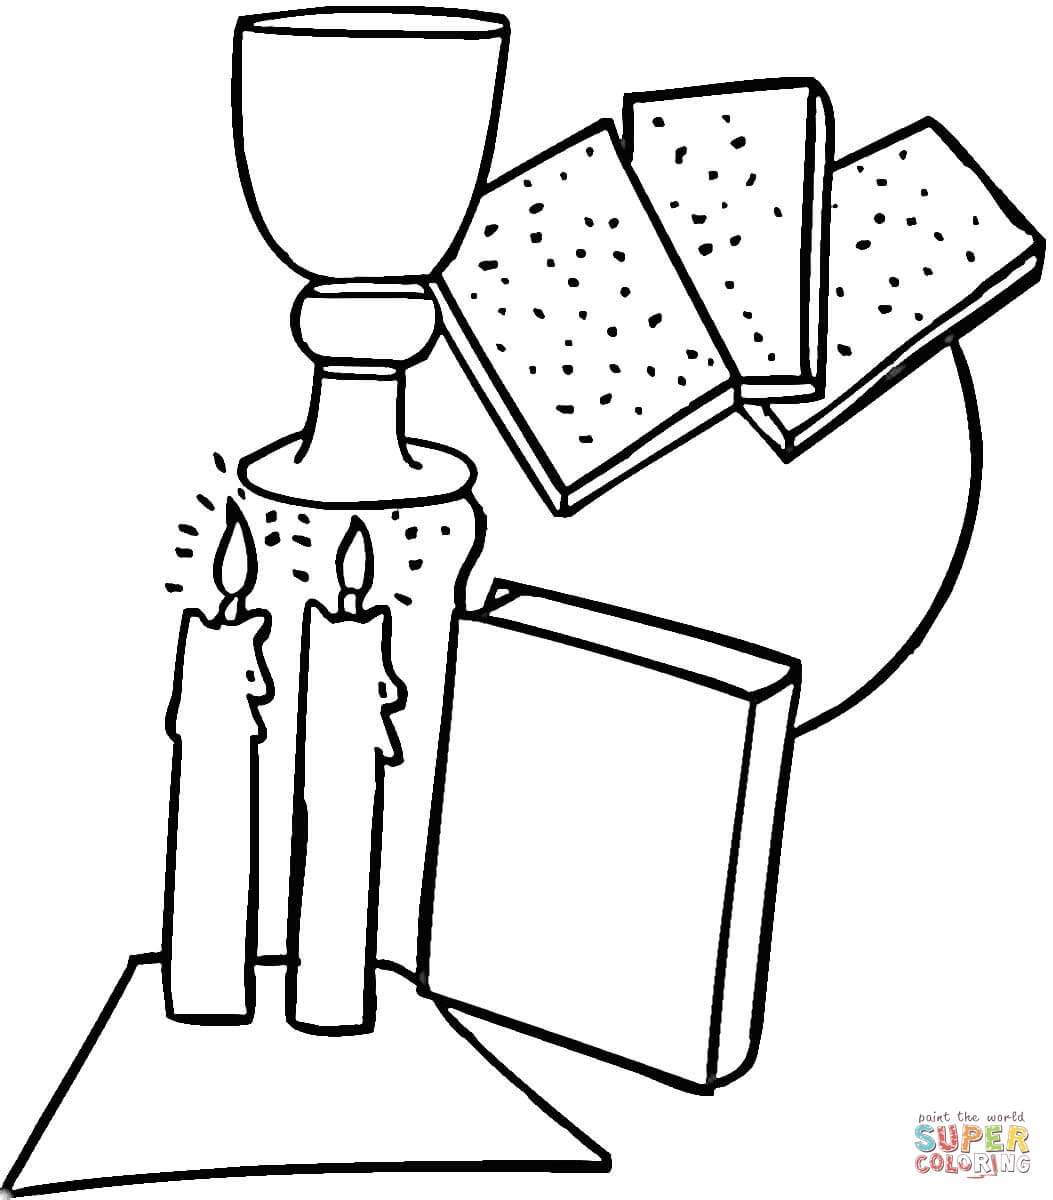 Pesach coloring page free printable coloring pages